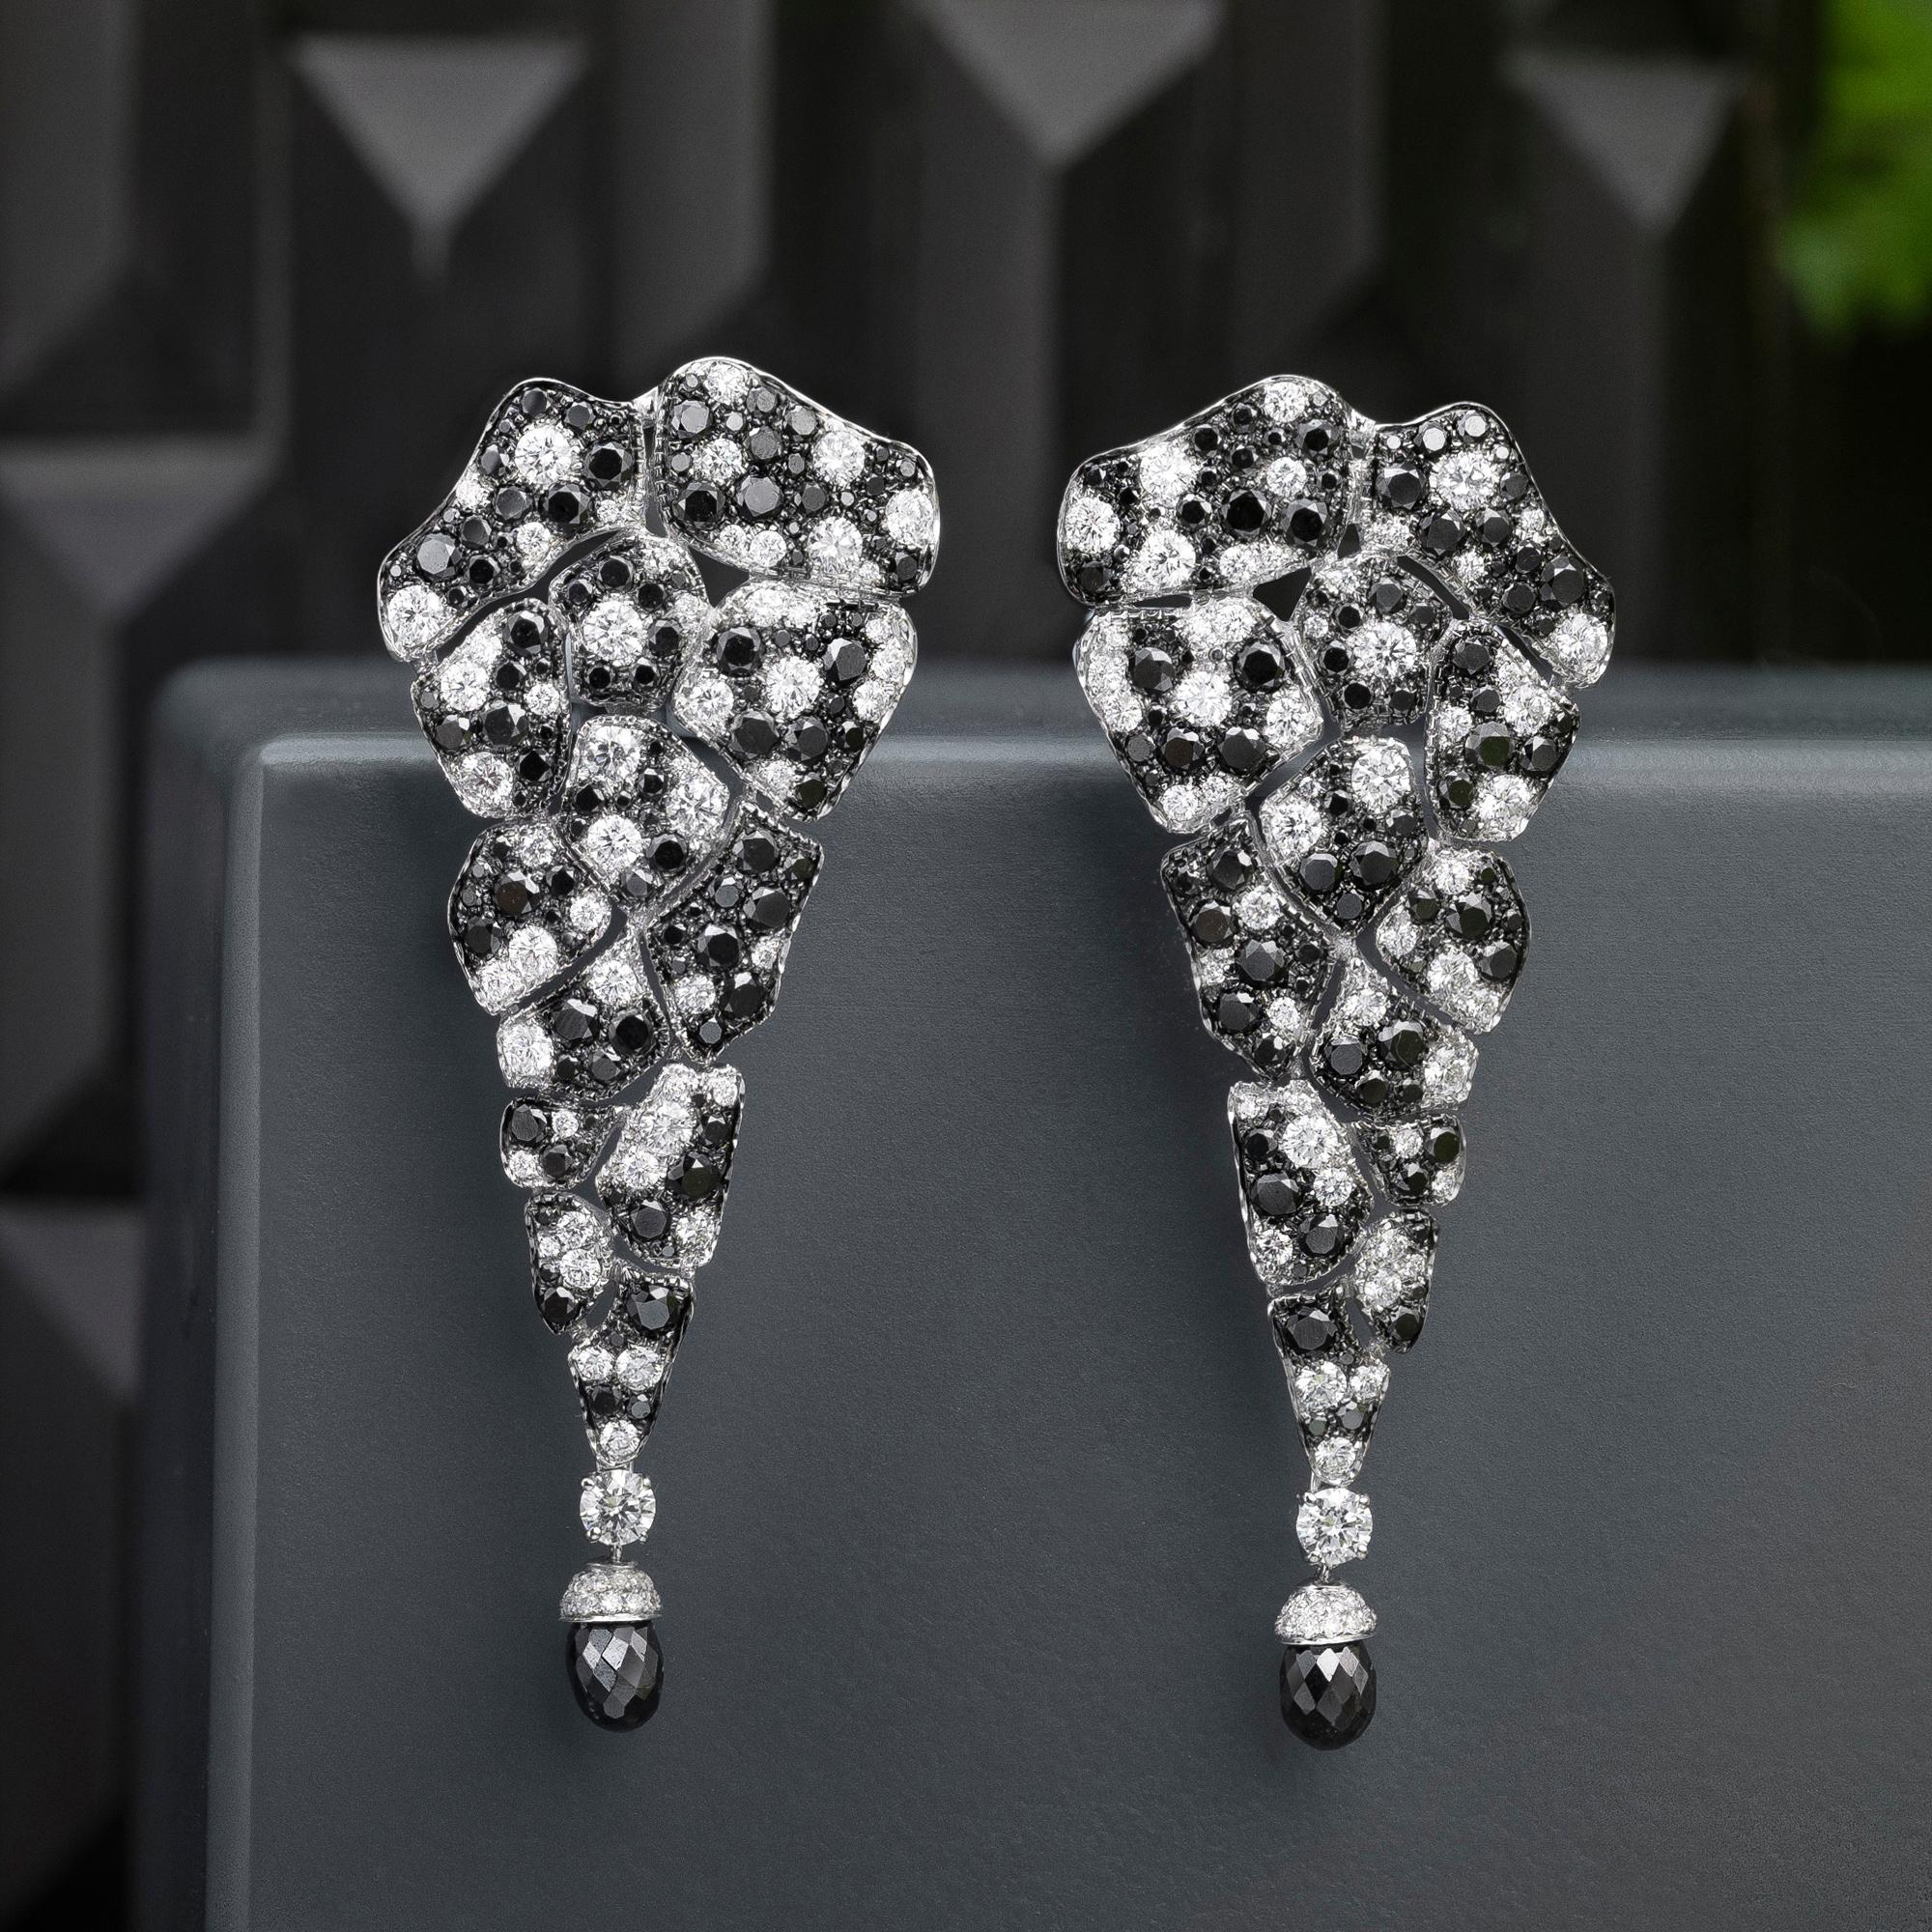 18 Karat White Gold, Black Diamonds and White Diamonds Chandelier Earrings In New Condition For Sale In Mayfair, London, GB